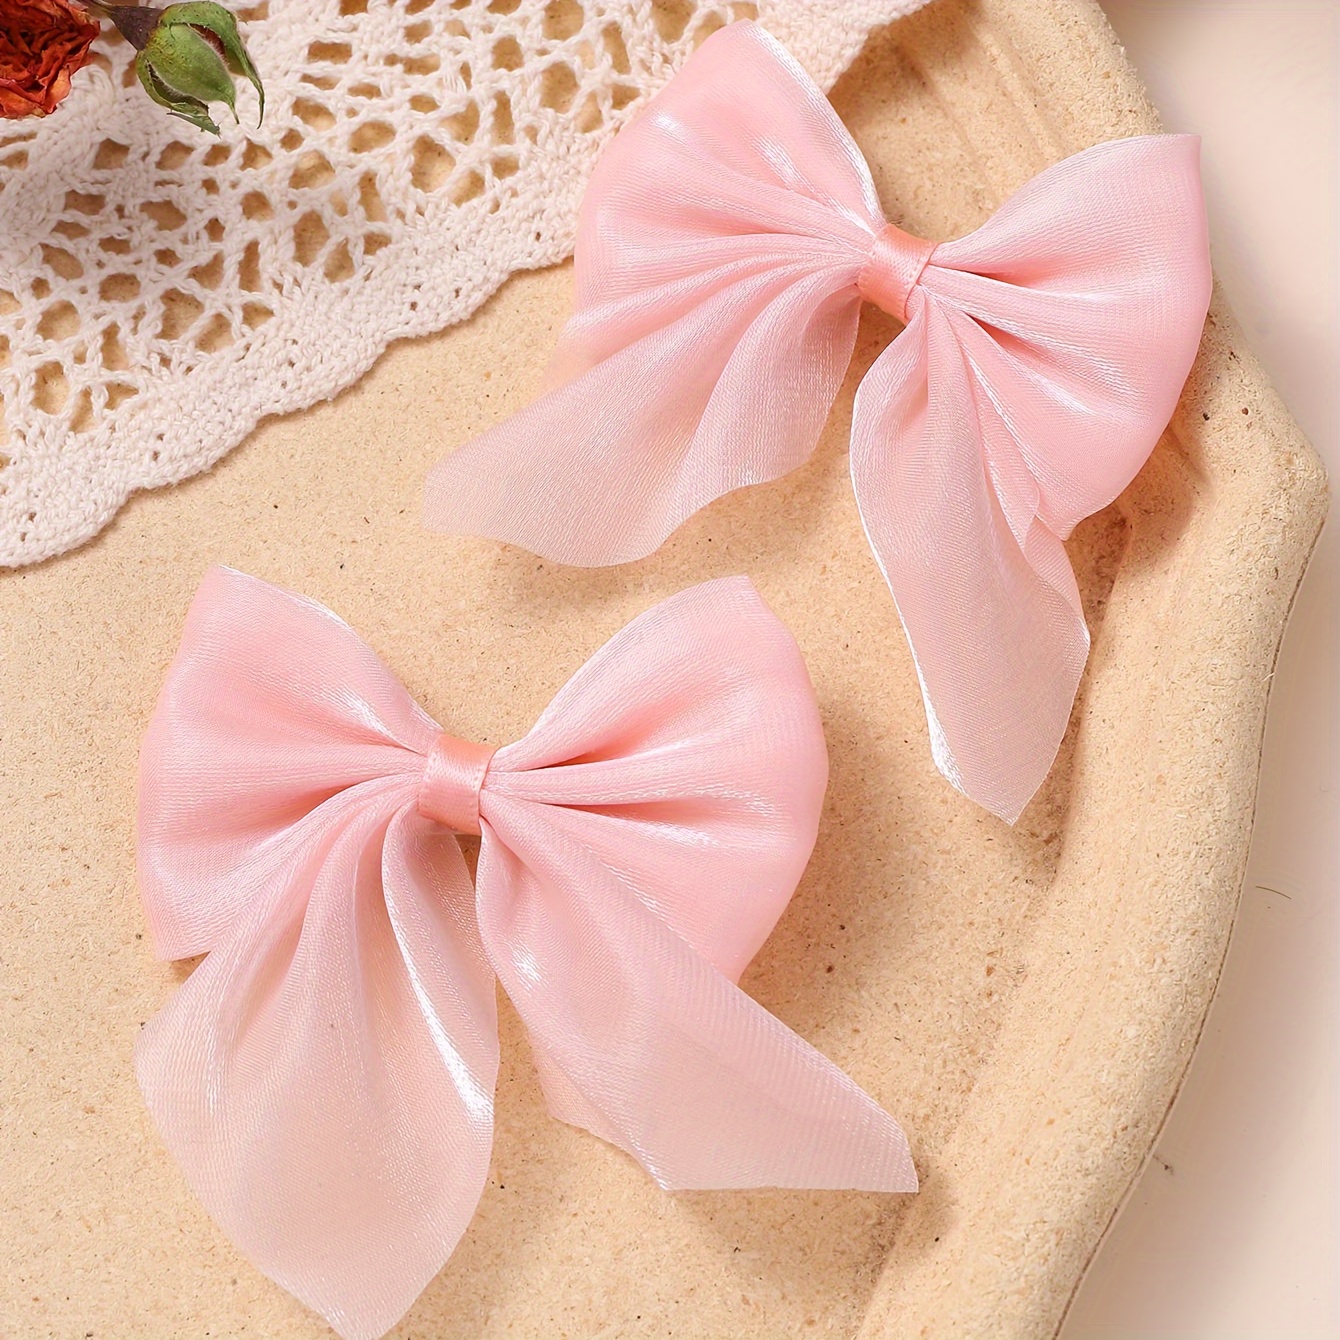 2pcs Ballet Style Simple Hair Clip With Ribbon Bow For Women, Suitable For  All Occasions